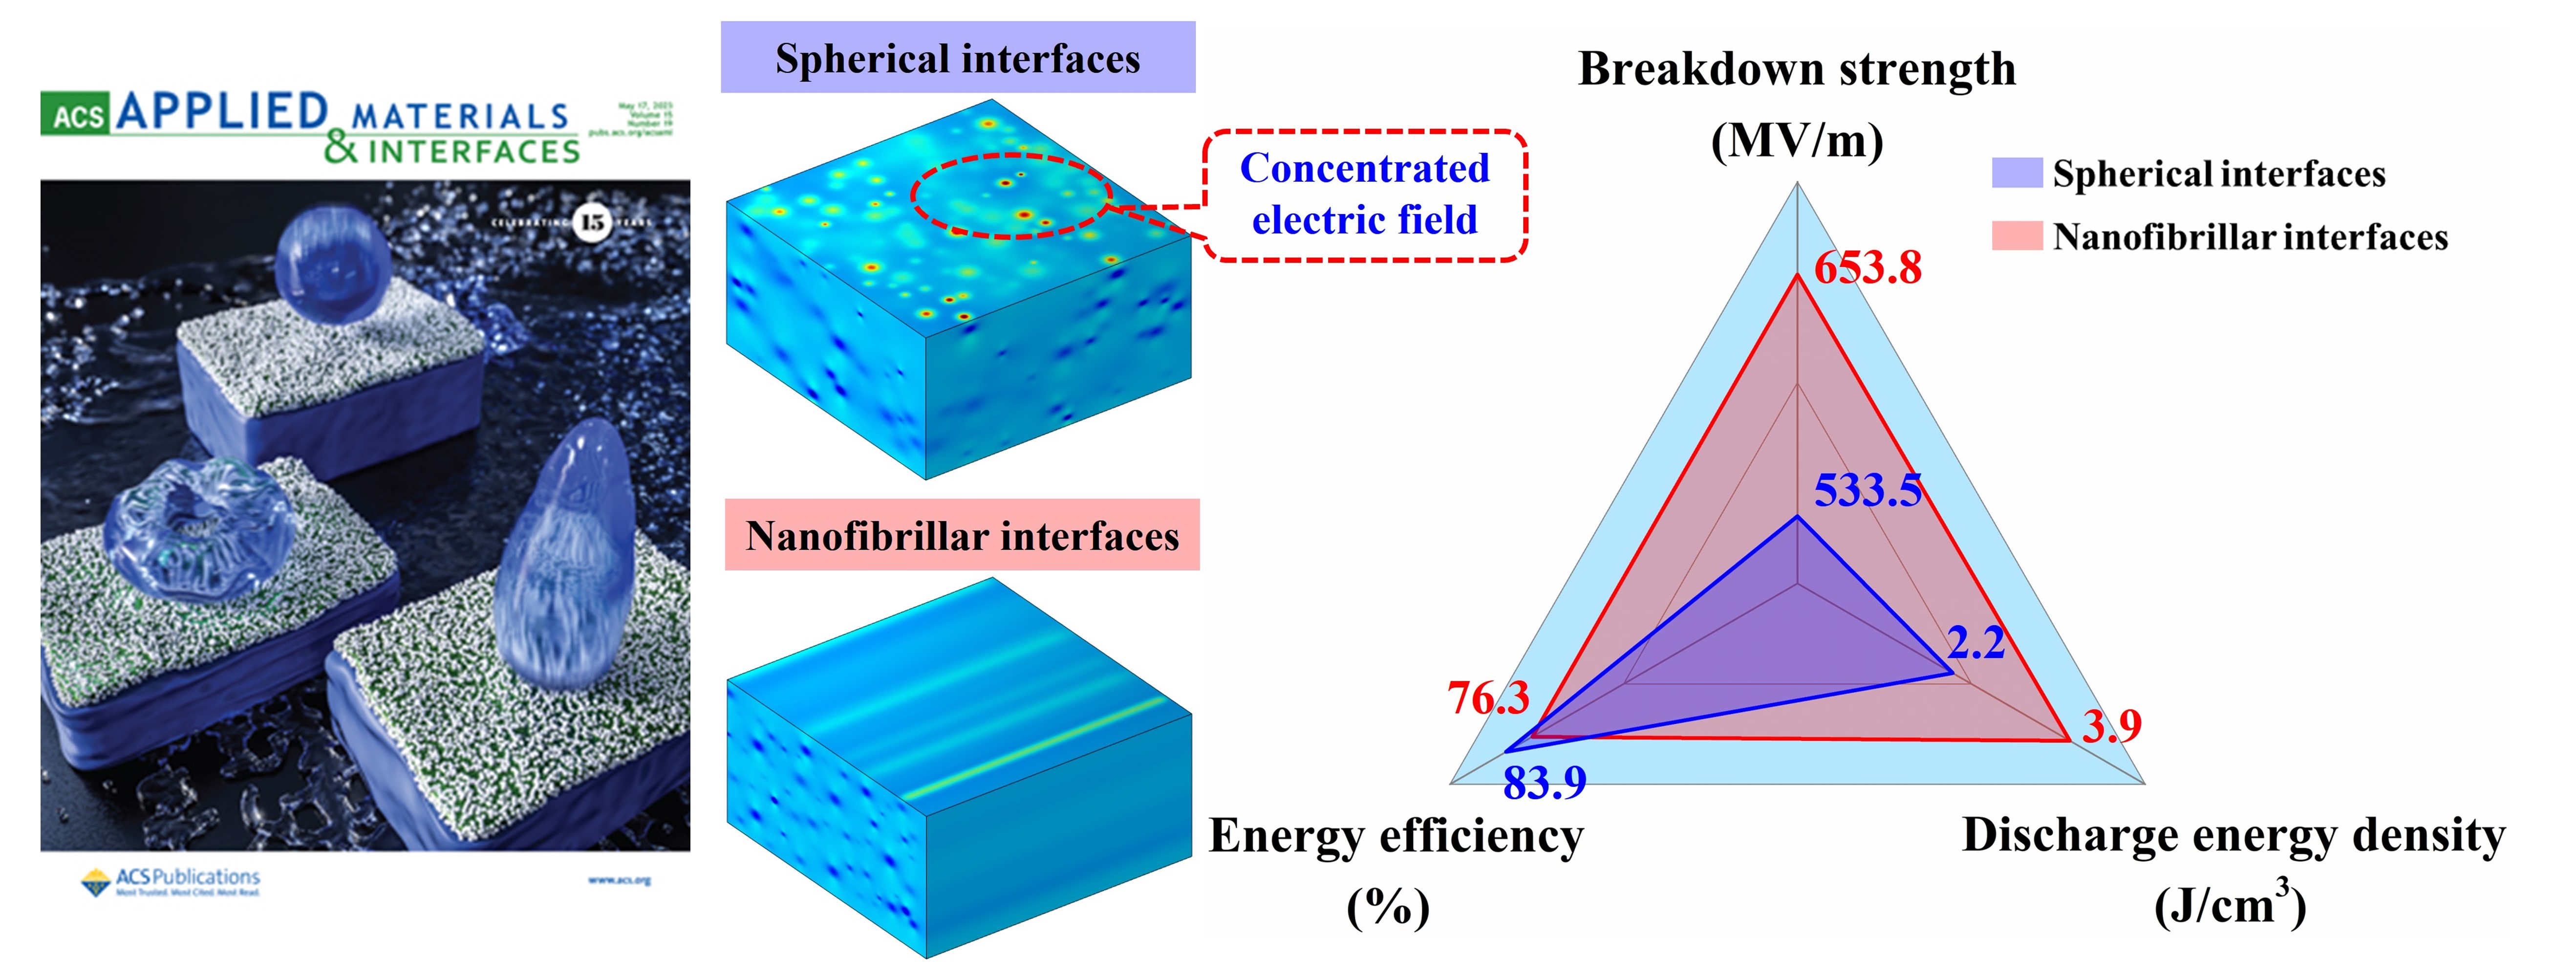 Toward Excellent Energy Storage Performance via Well-Aligned and Isolated Interfaces in Multicomponent Polypropylene-Based All Organic Polymer Dielectric Films